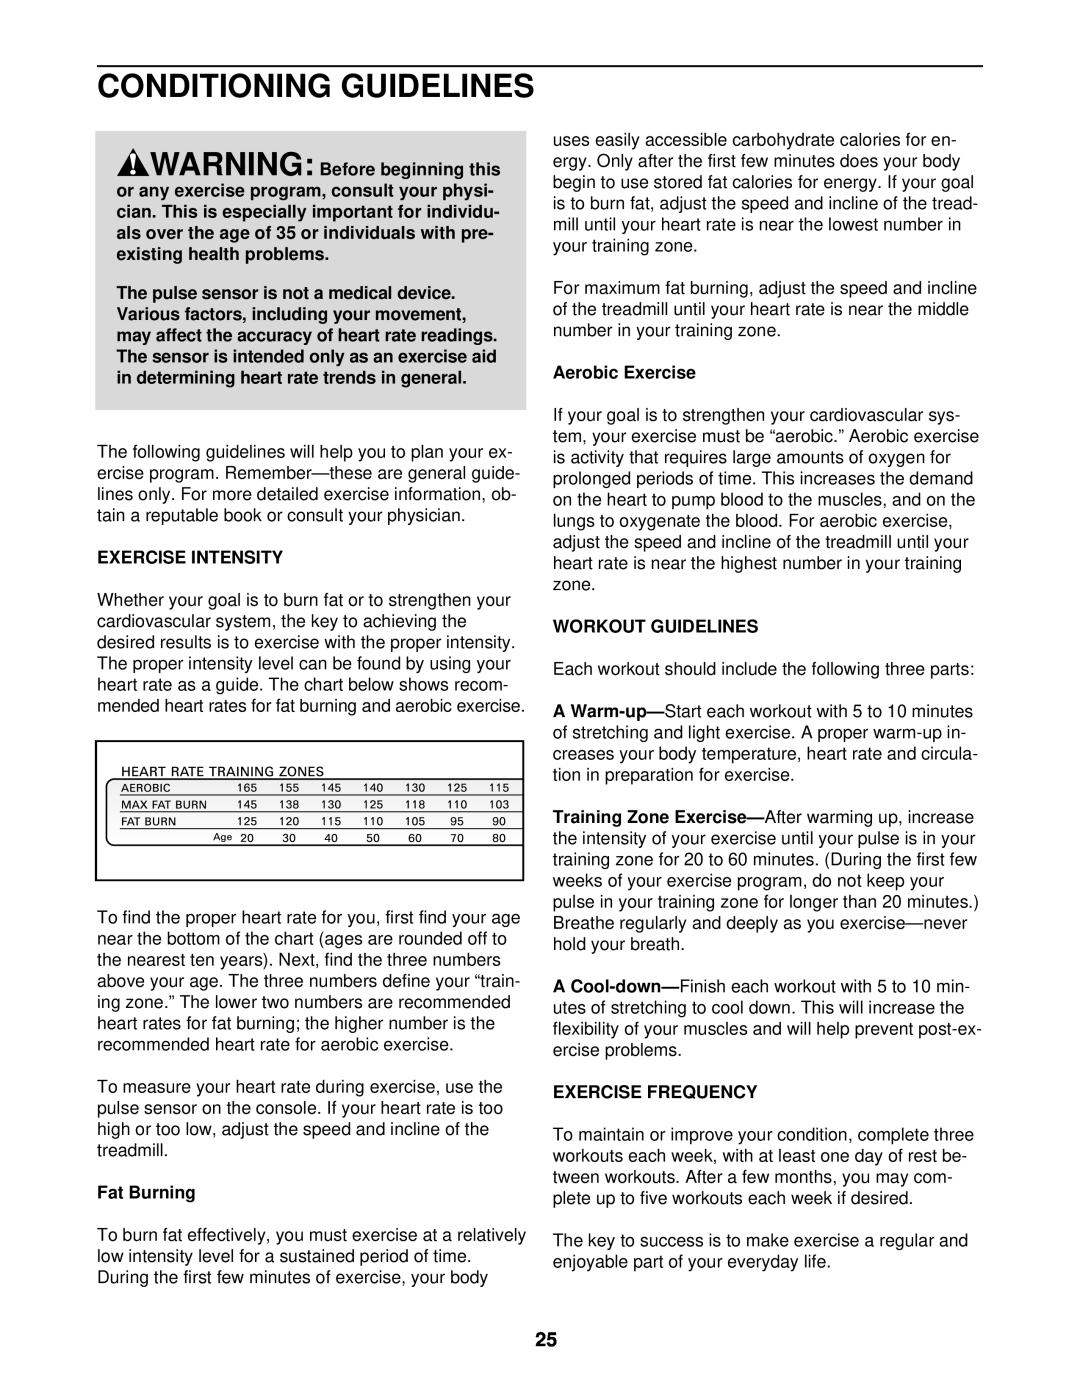 NordicTrack NTTL09610 Conditioning Guidelines, Exercise Intensity, Fat Burning, Aerobic Exercise, Workout Guidelines 